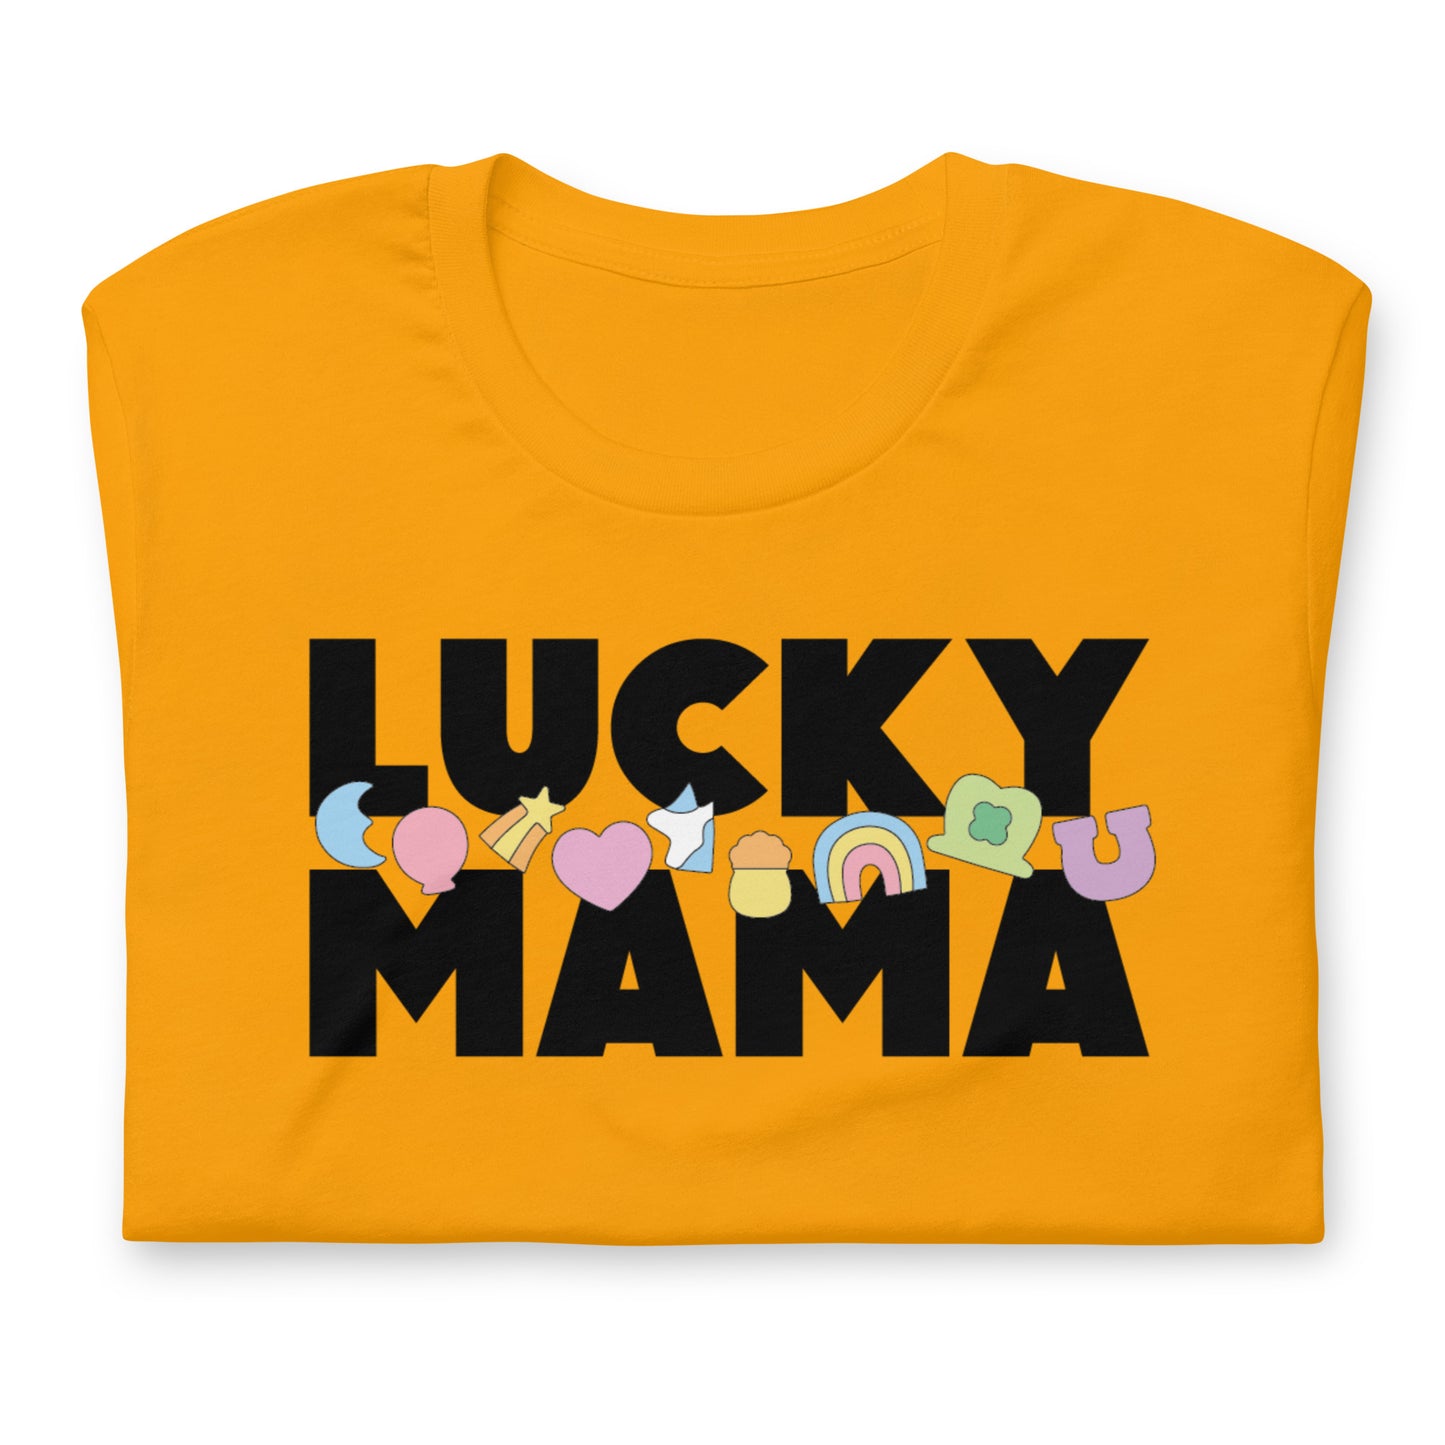 Lucky Mama - Black ink